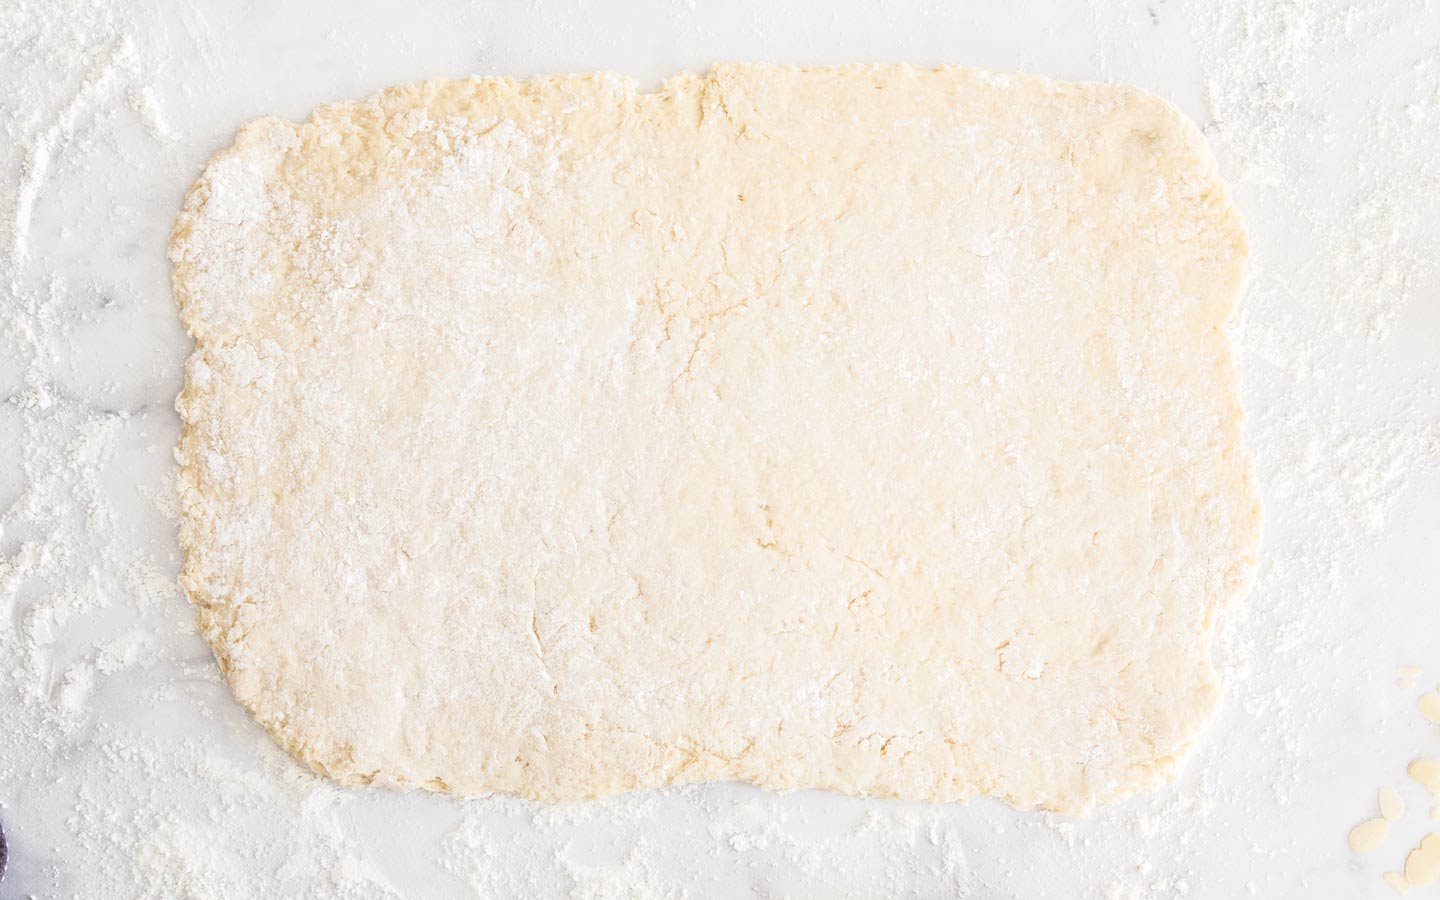 The dough after the first roll.